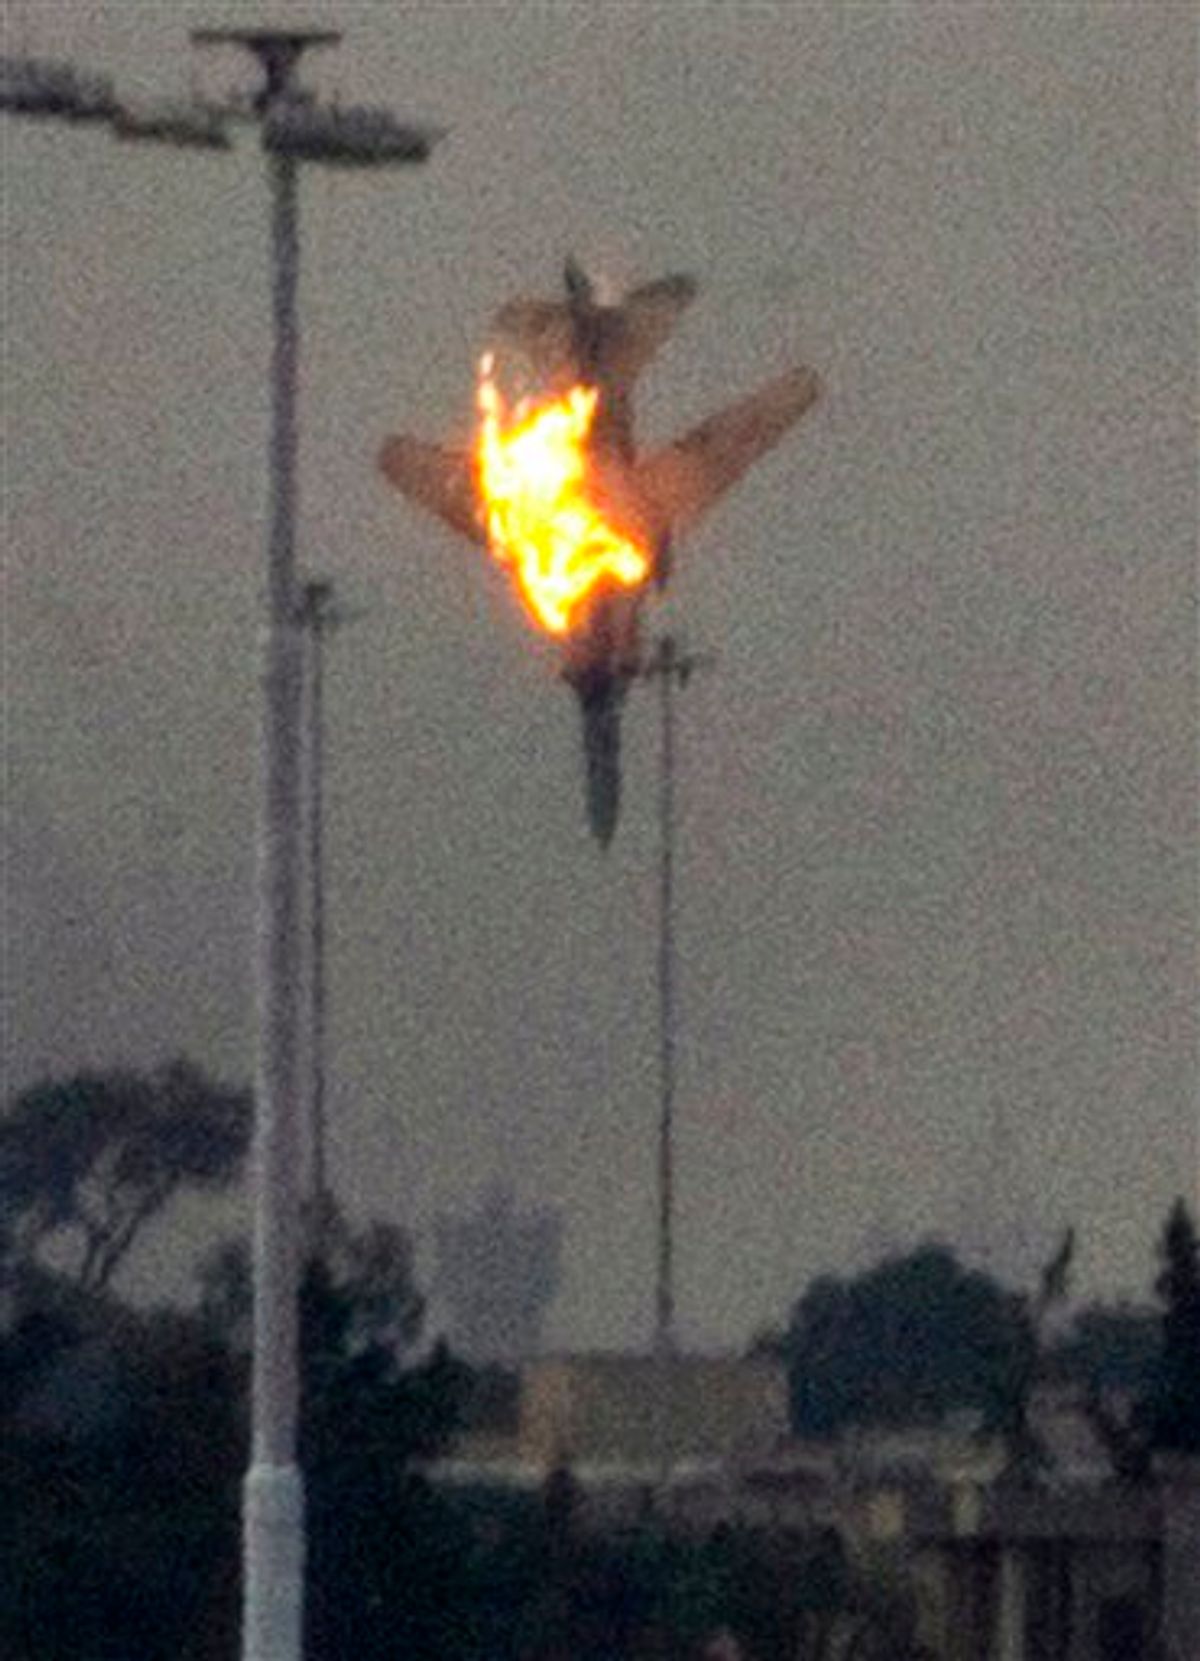 ALTERNATIVE CROP - A doomed warplane plummets towards earth after it was shot down by anti-Gadhafi forces over the outskirts of Benghazi, eastern Libya, Saturday, March 19, 2011.  An object, thought to be the pilot, was seen to eject from the cockpit shortly before impact.  Explosions shook the Libyan city of Benghazi early on Saturday while a fighter jet was heard flying overhead, and residents said the eastern rebel stronghold was under attack from  forces loyal to Libyan leader Moammar Gadhafi. (AP Photo/Anja Niedringhaus) (AP)